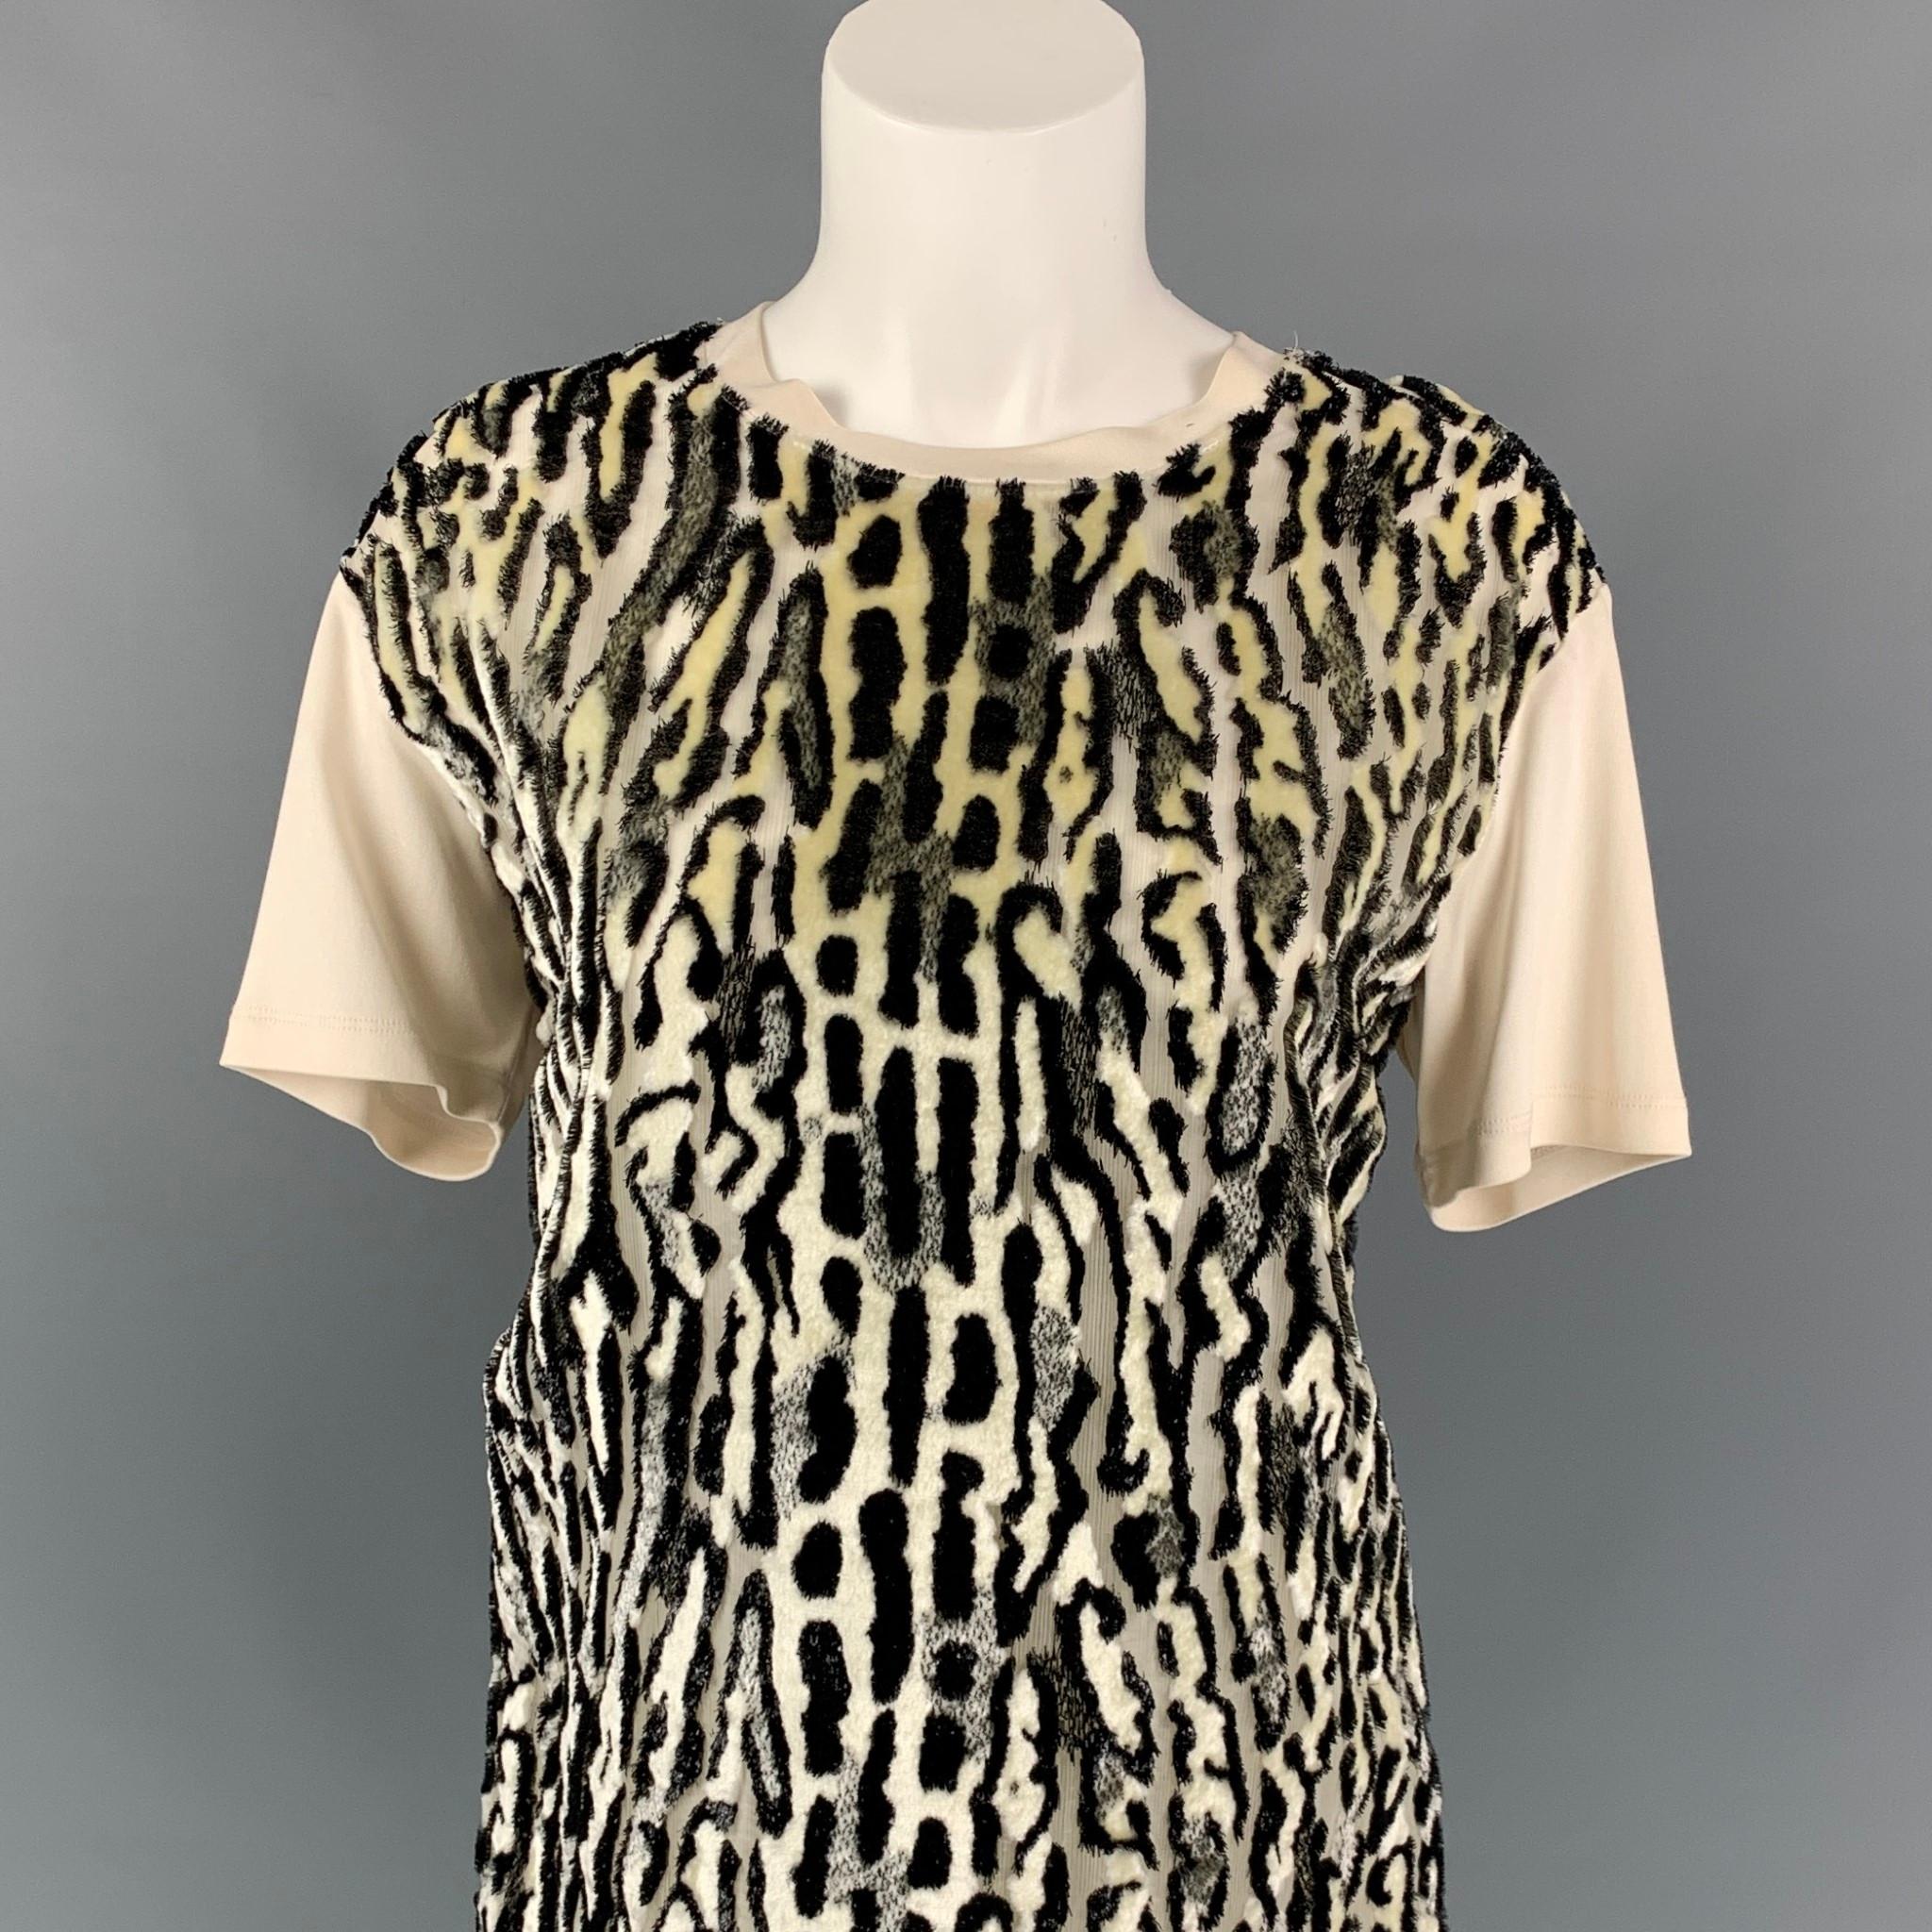 GIAMBATTISTA VALLI dress top comes in a black & white animal print silk featuring short sleeves and a crew-neck. Made in Italy. 

Very Good Pre-Owned Condition.
Marked: 40/XS

Measurements:

Shoulder: 19.5 in.
Bust: 40 in.
Sleeve: 8 in.
Length: 26.5